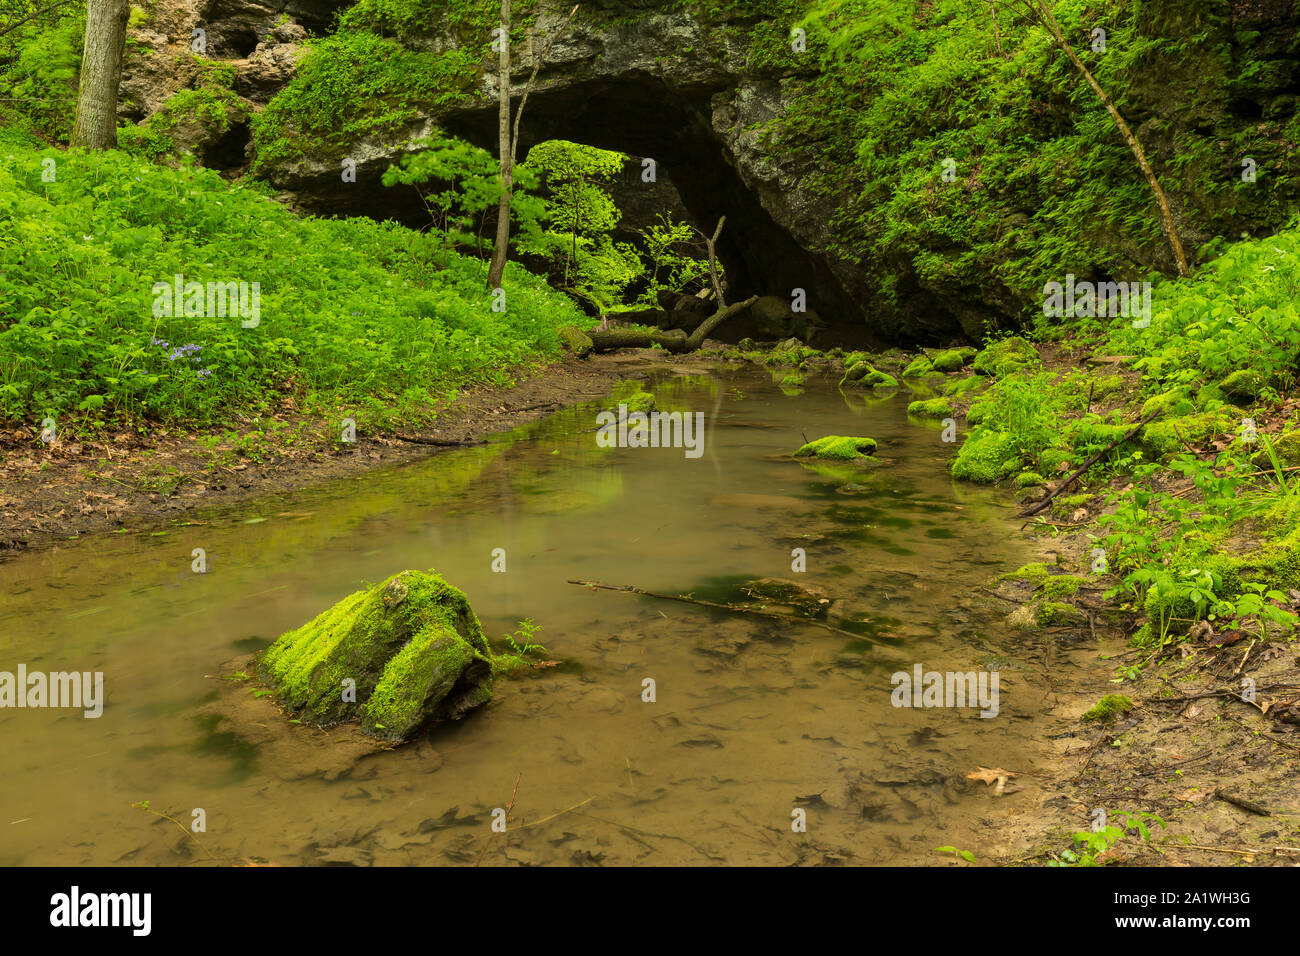 A Creek Traveling Through Natural Bridge Arch In The Woods Stock Photo